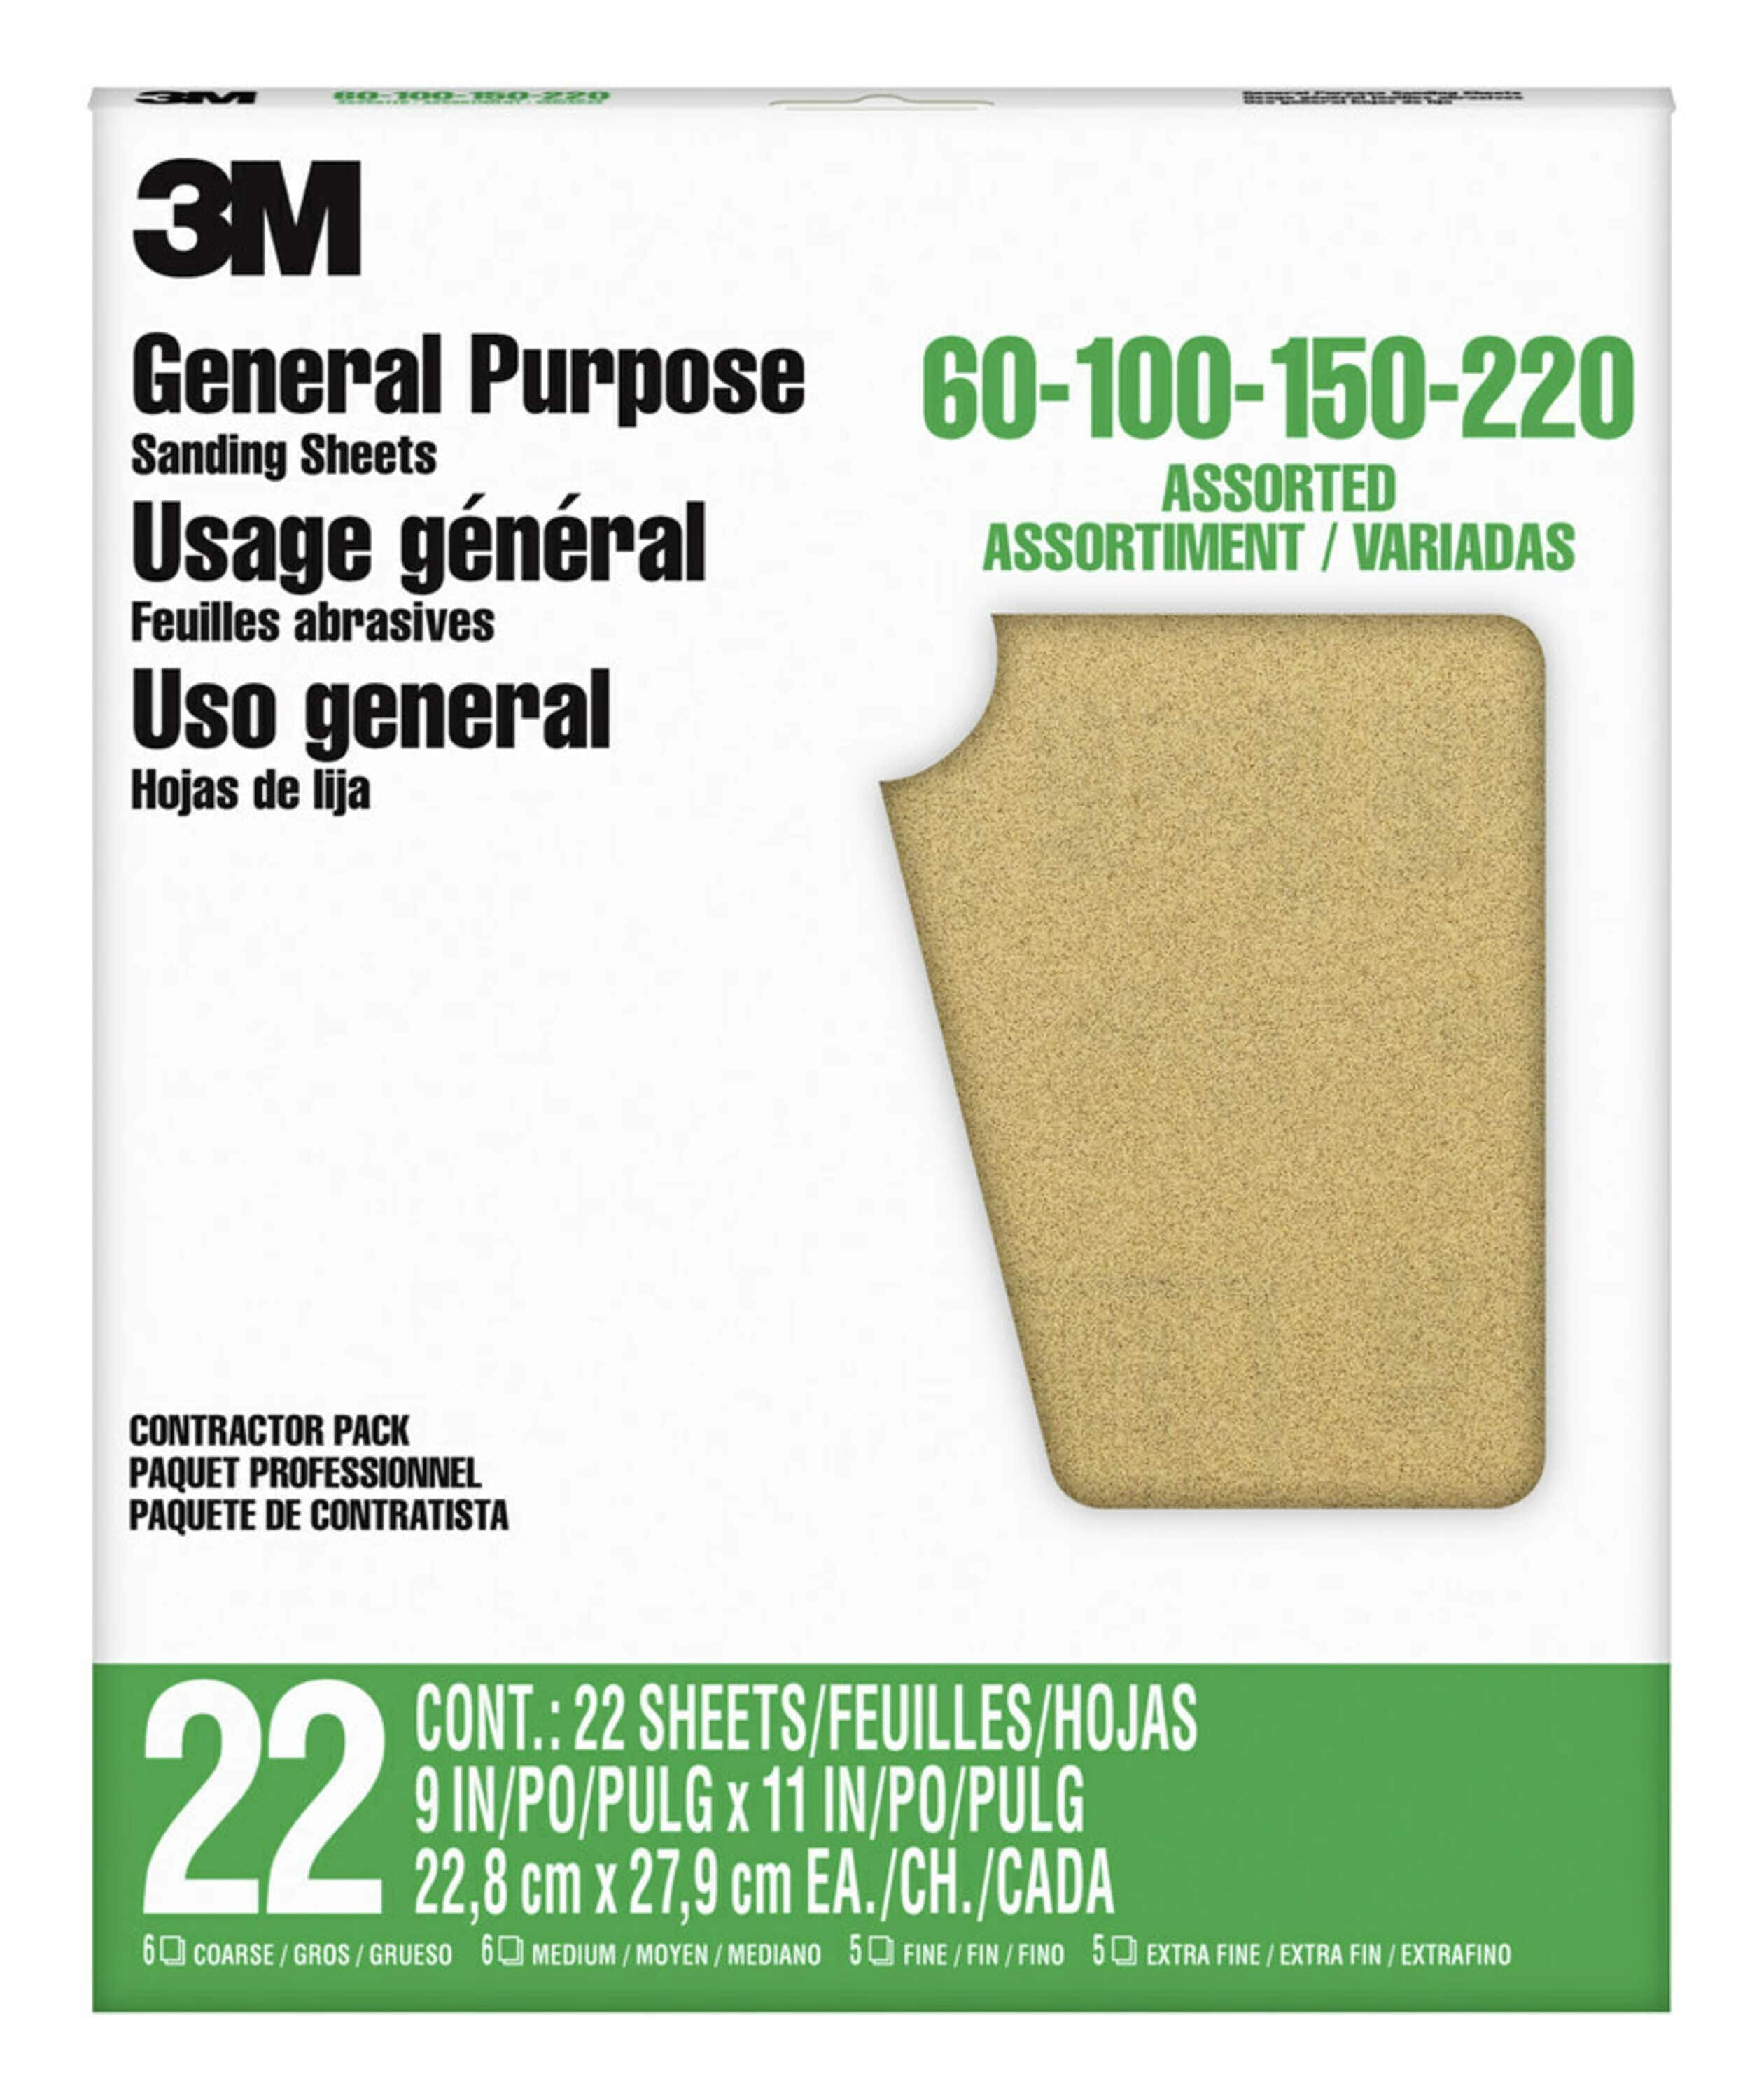 9-Inch by 11-Inch 5-Sheet 3M Wetordry Sandpaper Assorted Grit